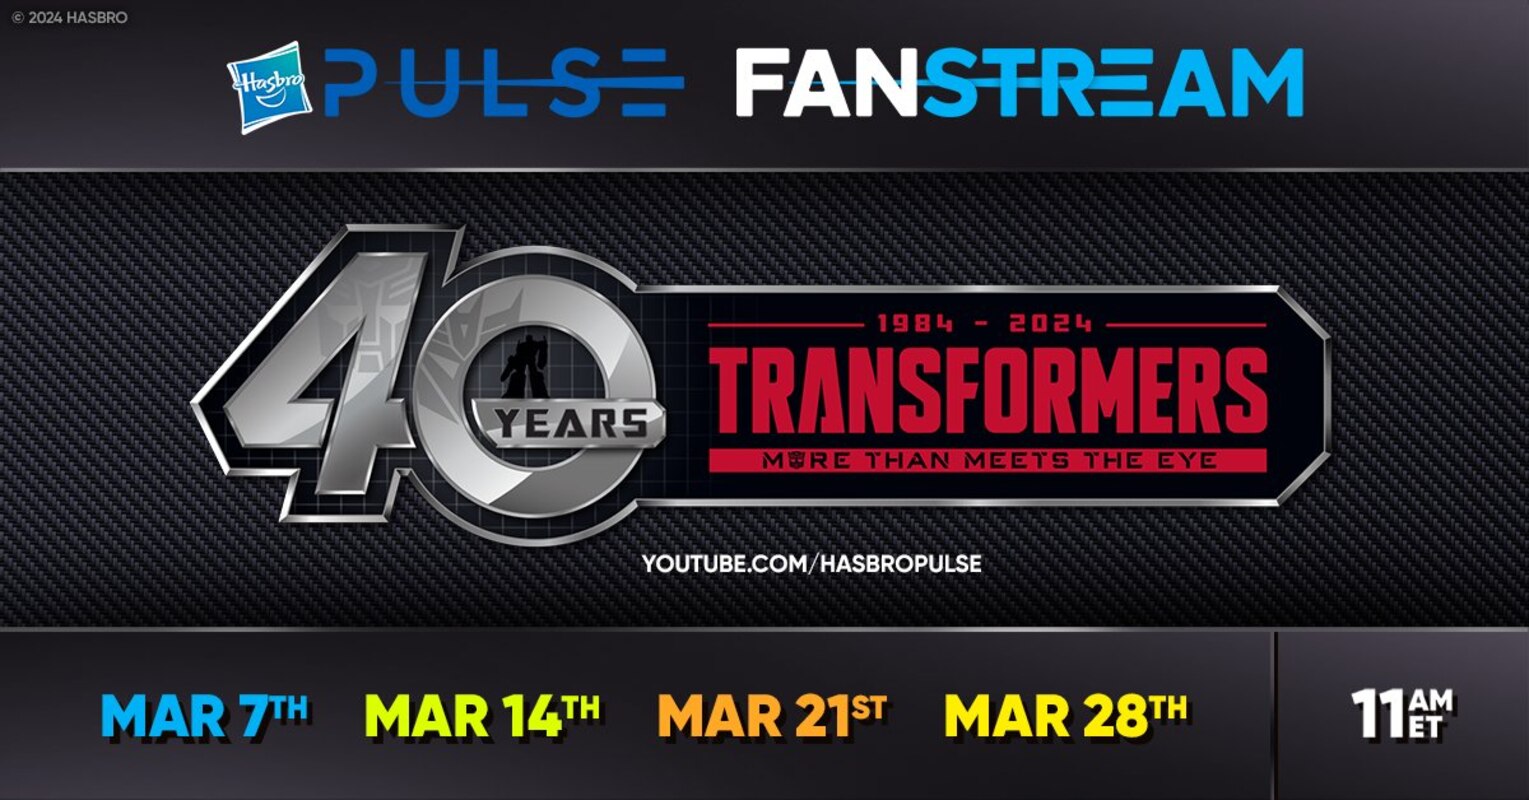 Transformers March 28th Fanstream Live Report - More 40th Anniversary Reveals!